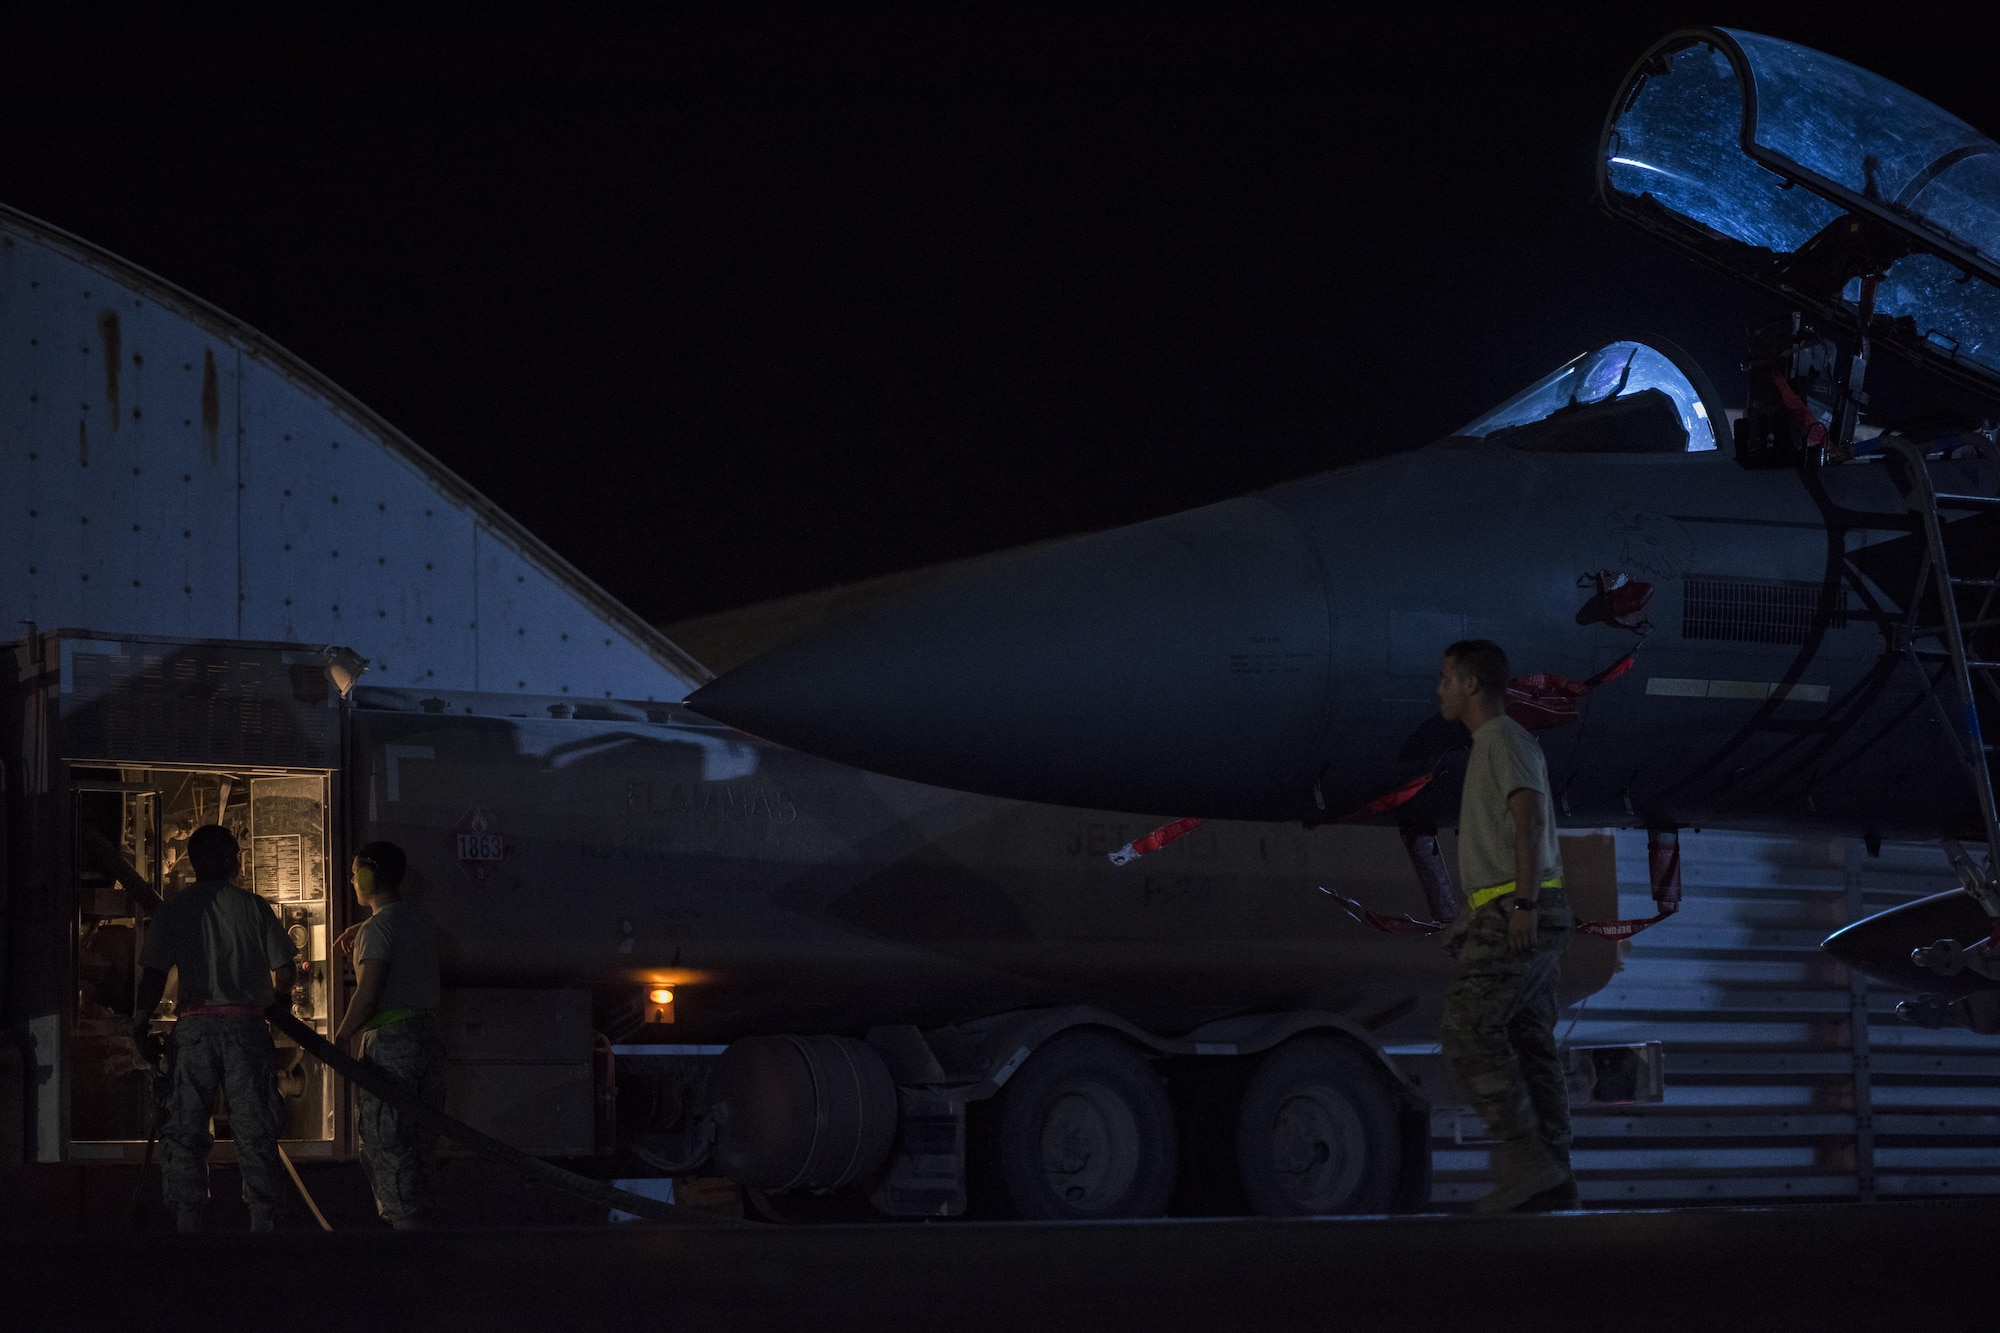 Airmen assigned to the 332nd Expeditionary Logistics Readiness Squadron defuel and F-15E Strike Eagle, July 21, 2017, in Southwest Asia. Defueling allows an aircraft to go through a thorough inspection. (U.S. Air Force photo/Senior Airman Damon Kasberg)